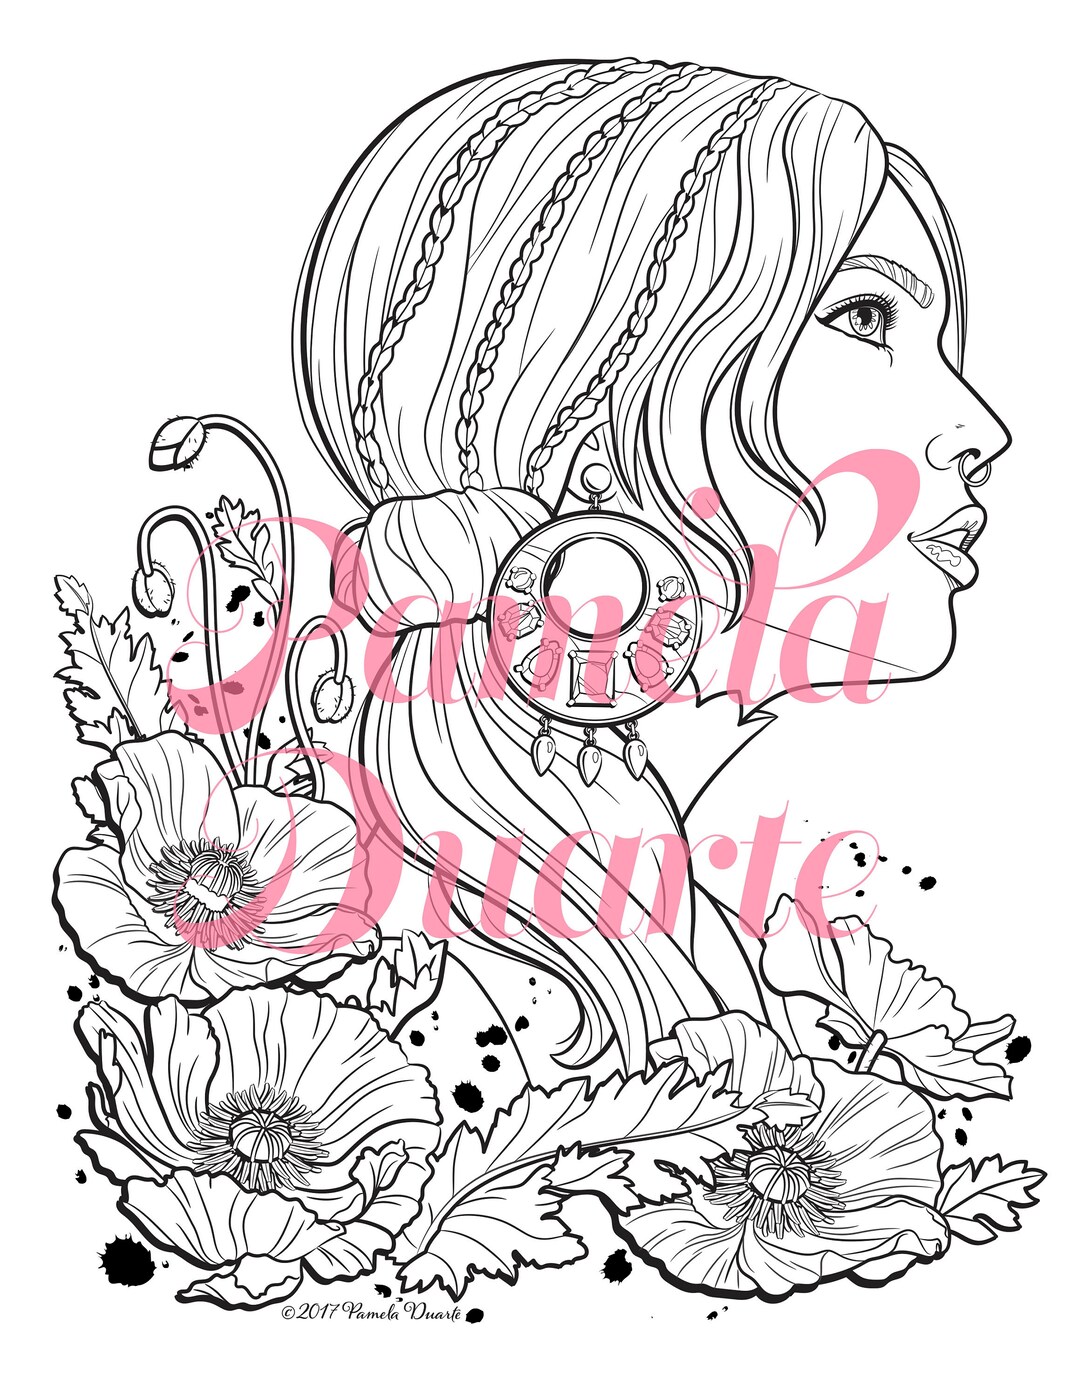 Be Inspired: Volume 2 Mini, Adult Coloring Book for Stress Relief 